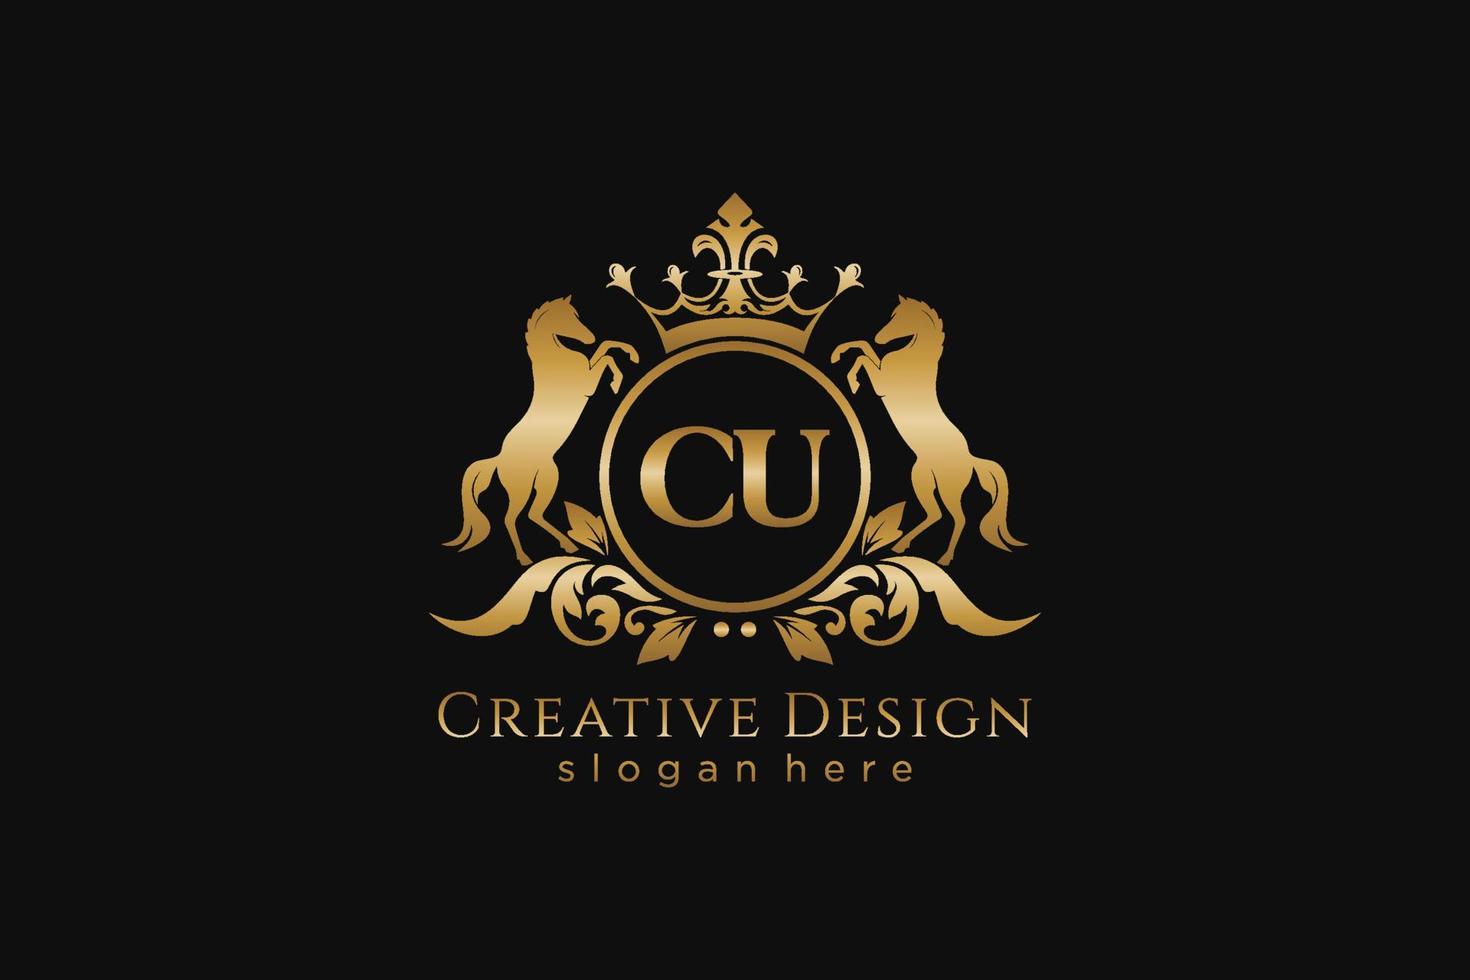 initial CU Retro golden crest with circle and two horses, badge template with scrolls and royal crown - perfect for luxurious branding projects vector